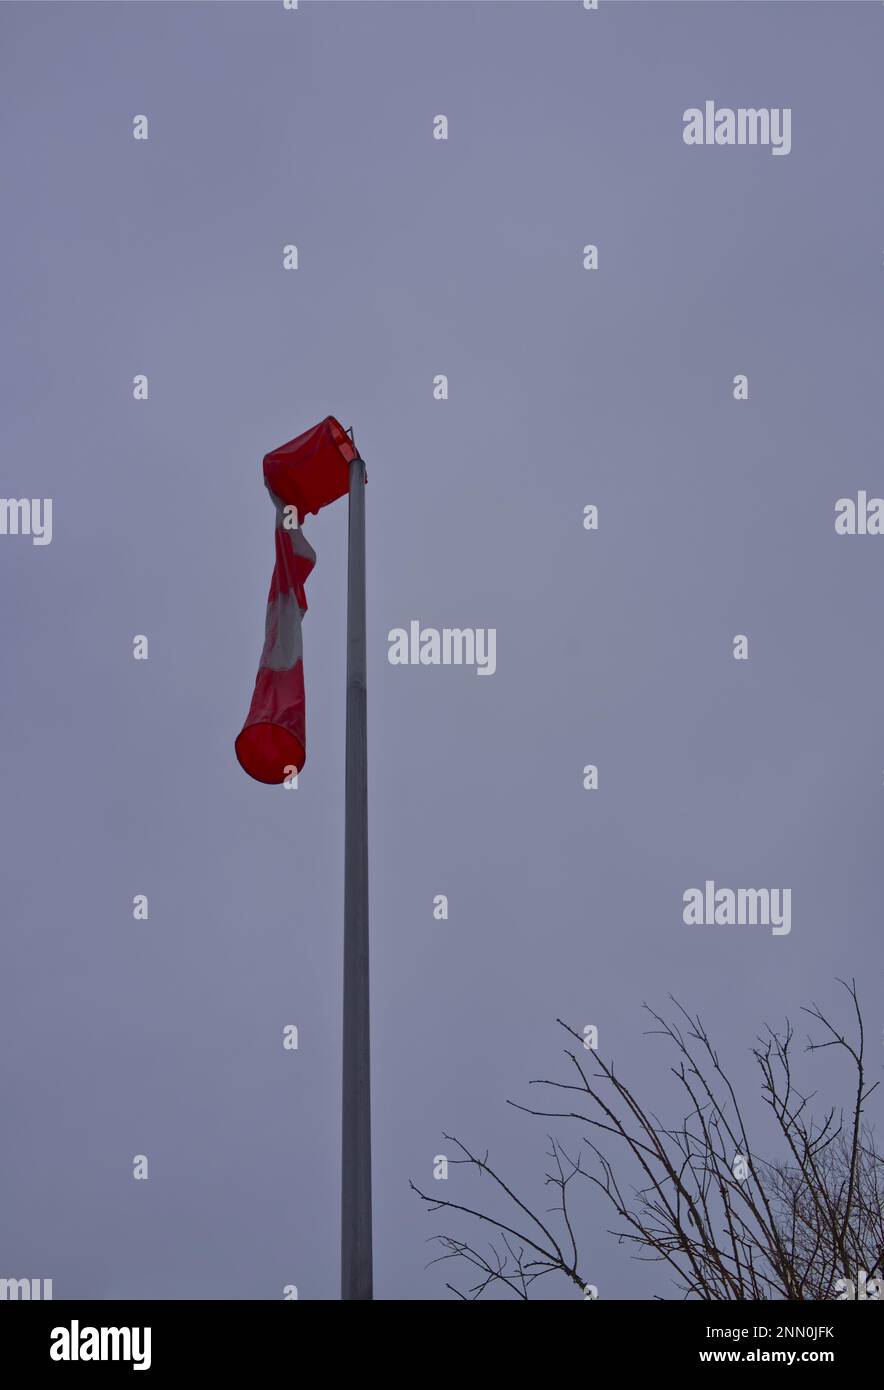 A windsock in red and white stripes in a hanging position at a lamppost signaling a lack of wind (possibly the wind calm before the storm) Stock Photo